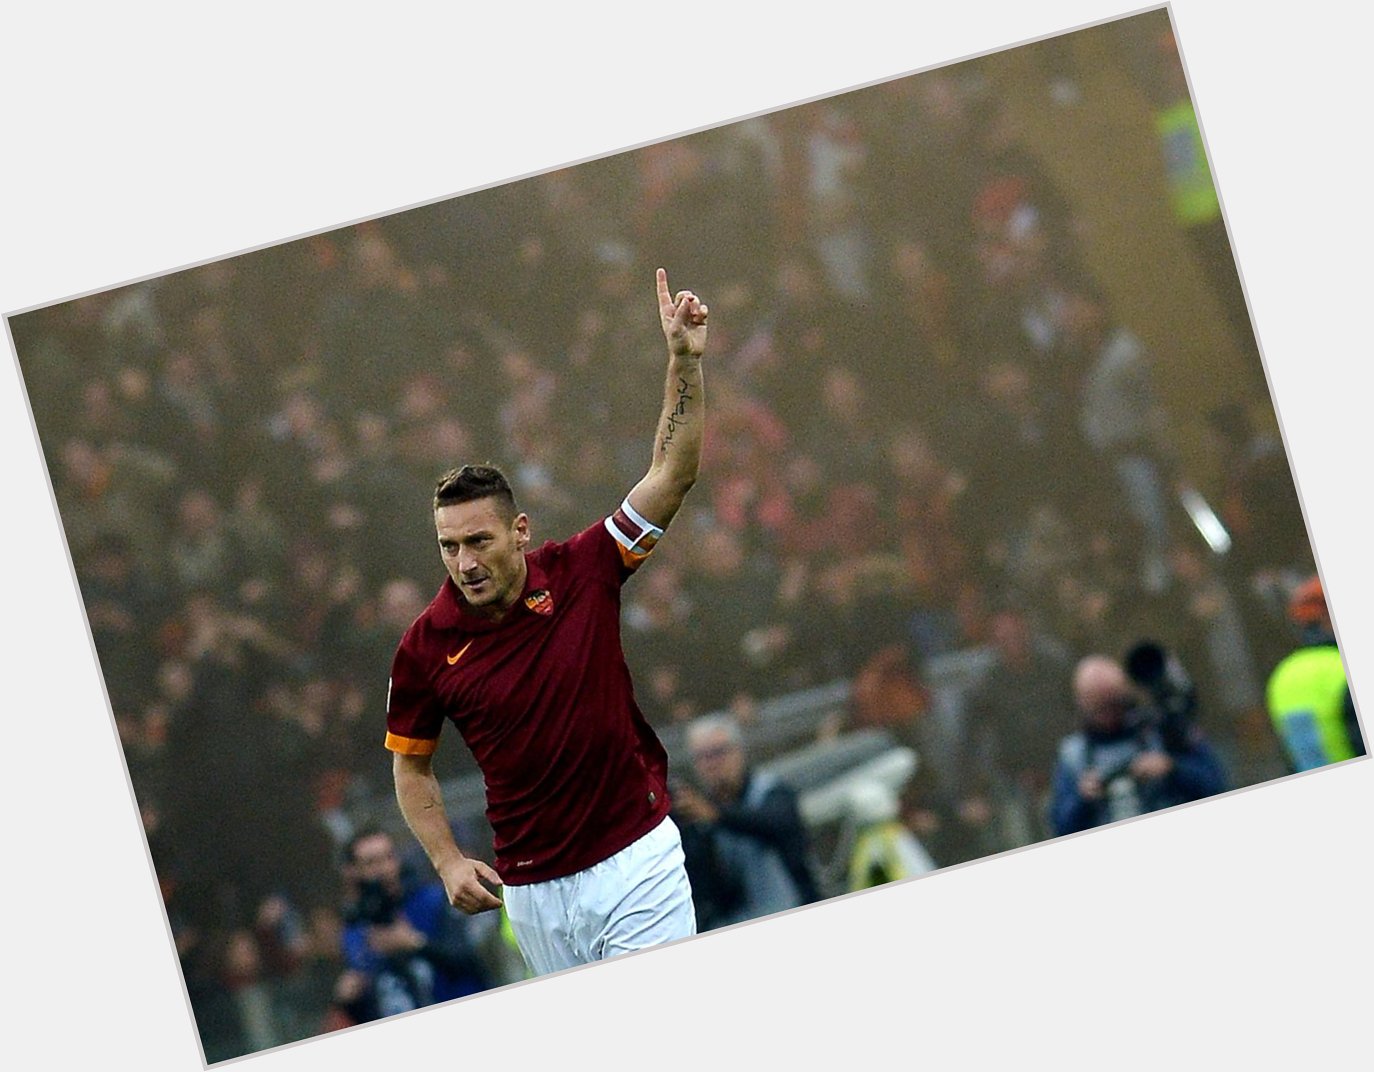 Happy birthday to Italian legend Francesco Totti; he\s scored 300 goals in 746 games for Roma. One-club man. 